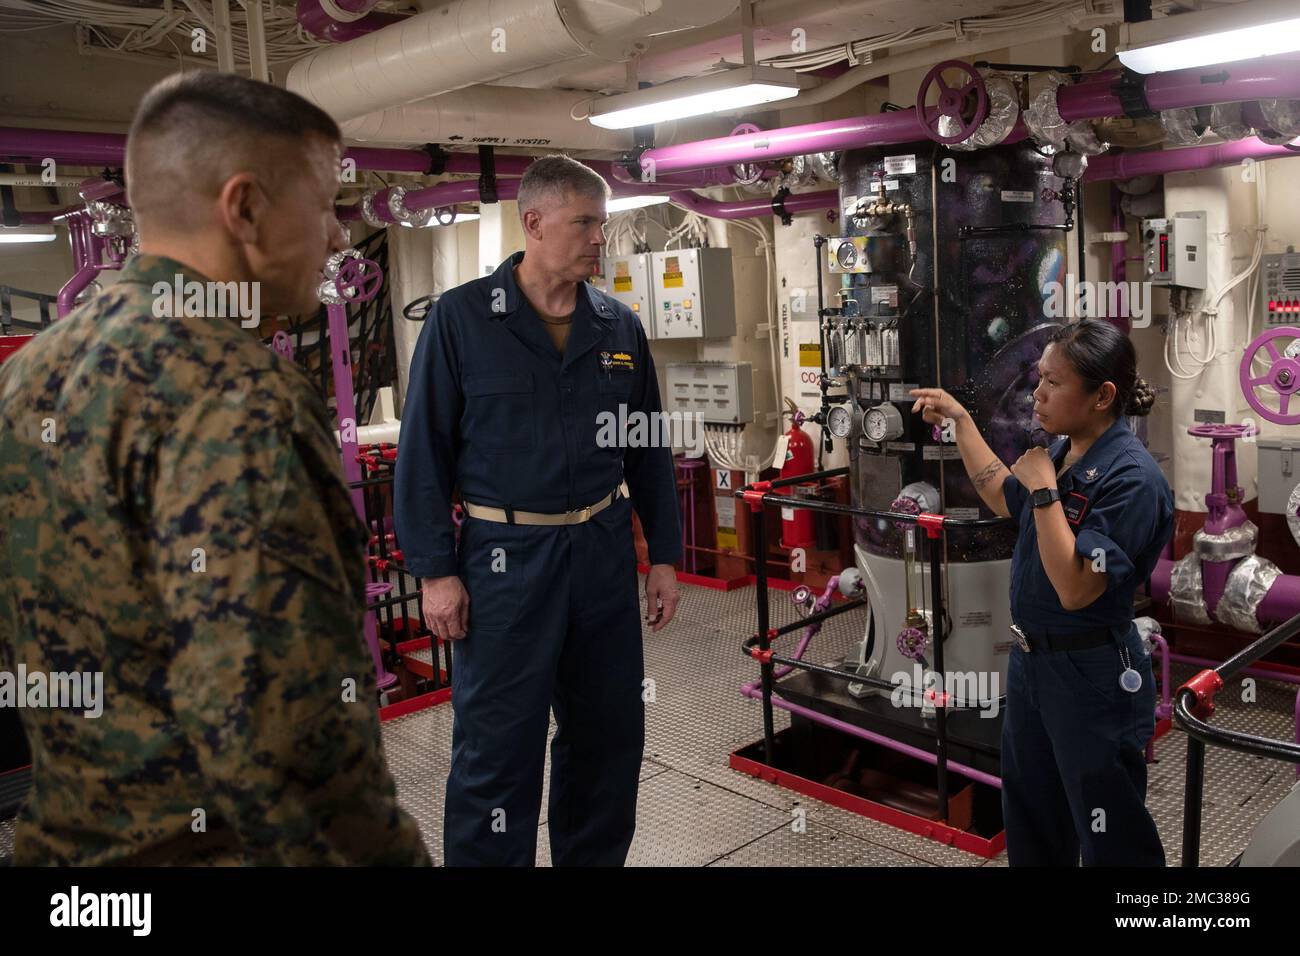 220624-N-XN177-2180 PACIFIC OCEAN (June 24, 2022) – U.S. Marine Corps Brigadier Gen. Fridrik Fridriksson, commanding general, 3rd Marine Expeditionary Brigade, left, and Rear Adm. Derek Trinque, commander, Expeditionary Strike Group 7, center, discuss fueling operations with Aviation Boatswain’s Mate (Fuels) 2nd Class Charlyn Andres in fuel room number one aboard amphibious assault carrier USS Tripoli (LHA 7), June 24, 2022. Tripoli is operating in the U.S. 7th Fleet area of operations to enhance interoperability with allies and partners and serve as a ready response force to defend peace and Stock Photo